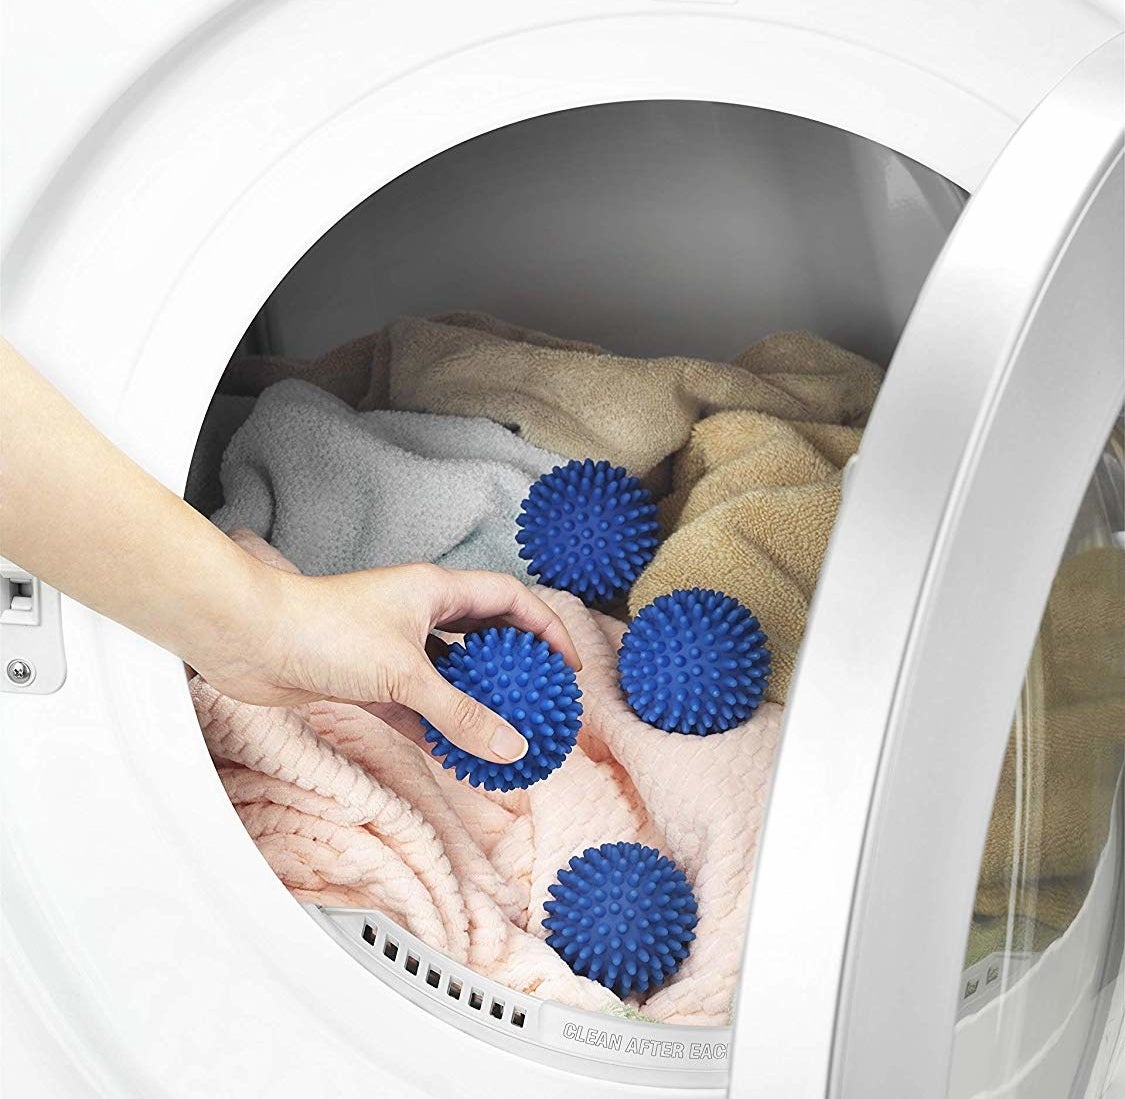 A person putting the dryer balls into their machine